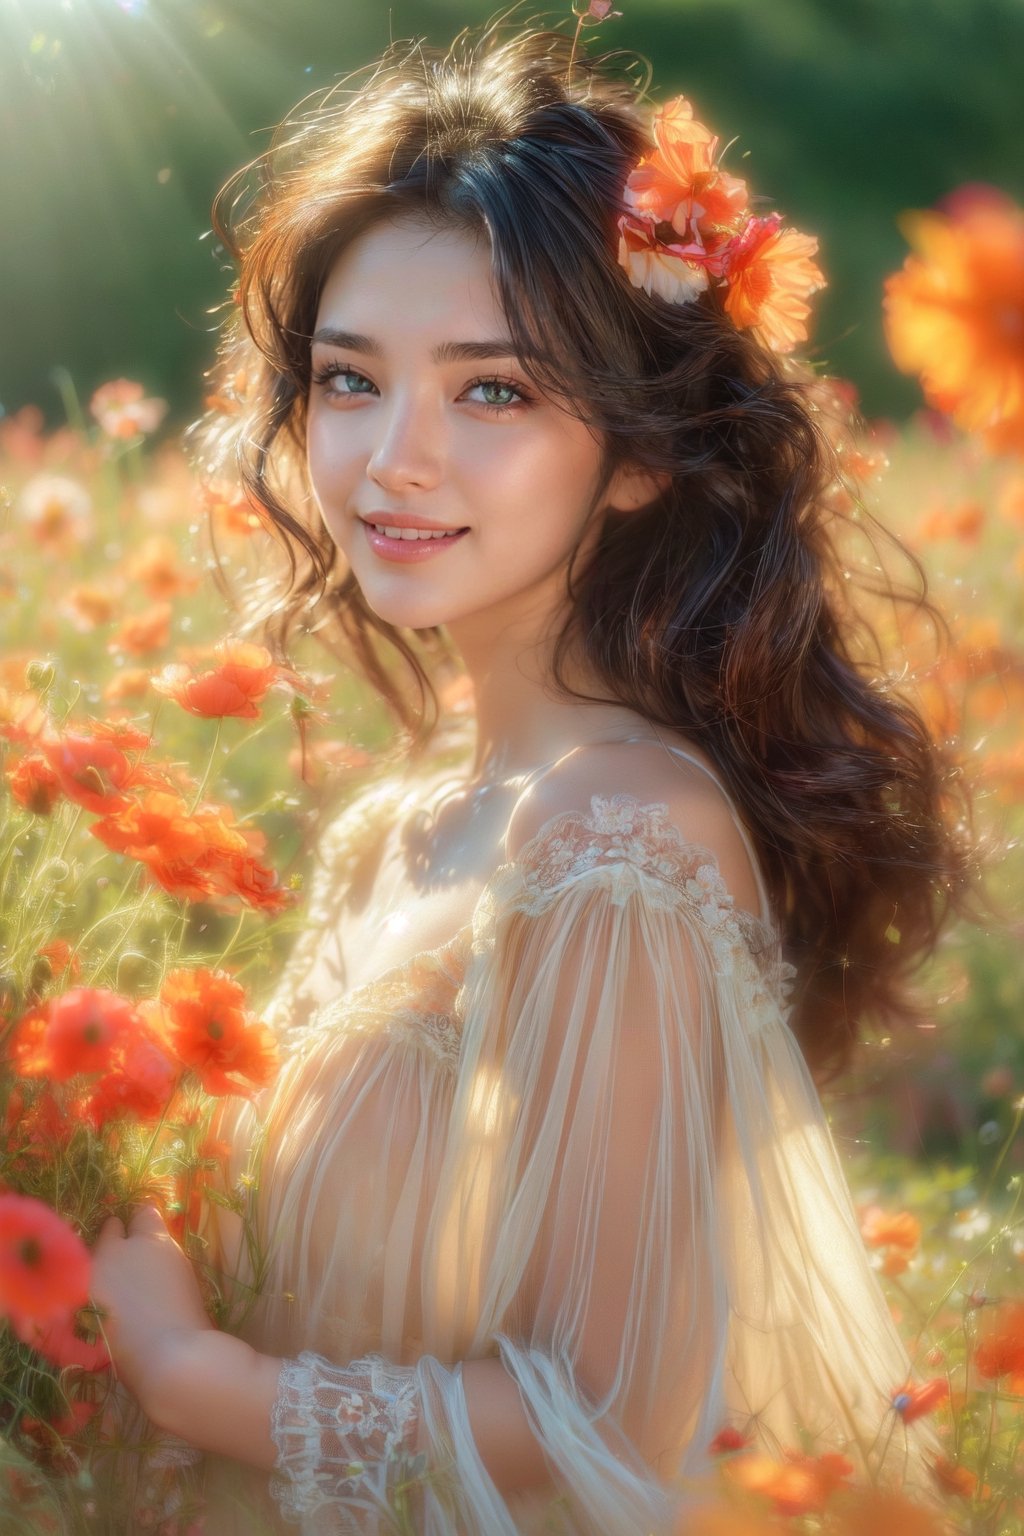 (Masterpiece, Realistic, 16K), Cinematic Lighting, Sunlight and Shadows, Ultra Realistic Photography, Pastel Background and Blur, Exquisite Detail and Texture, Natural, (Wind: 0.5), Dynamic Angle of View, Bright Light and Shadow Grains, Color 130mm Lens, Chrome Film, Film Grain Effect, Self Portrait, japanese girl standing on hill with poppies, solo, (((close-up of face smiling and looking at flowers))), long hair, dark hair, long sleeves, dress, flowers surround her, outdoors, morning sky,